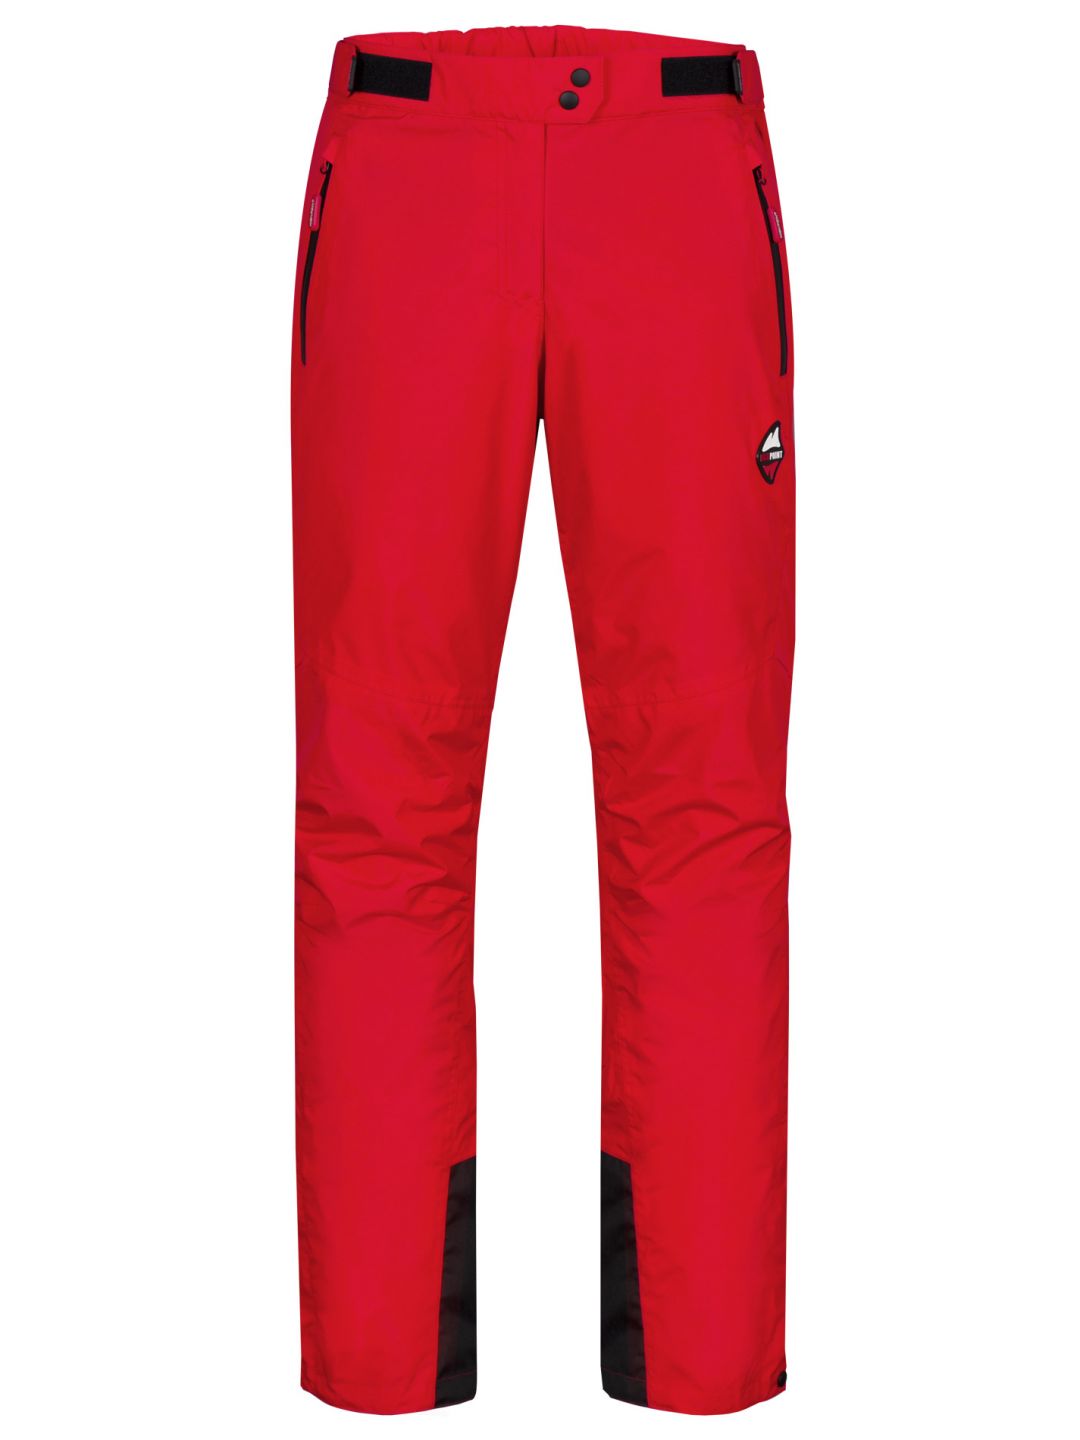 HIGH POINT Coral 2.0 Lady Pants red varianta: L